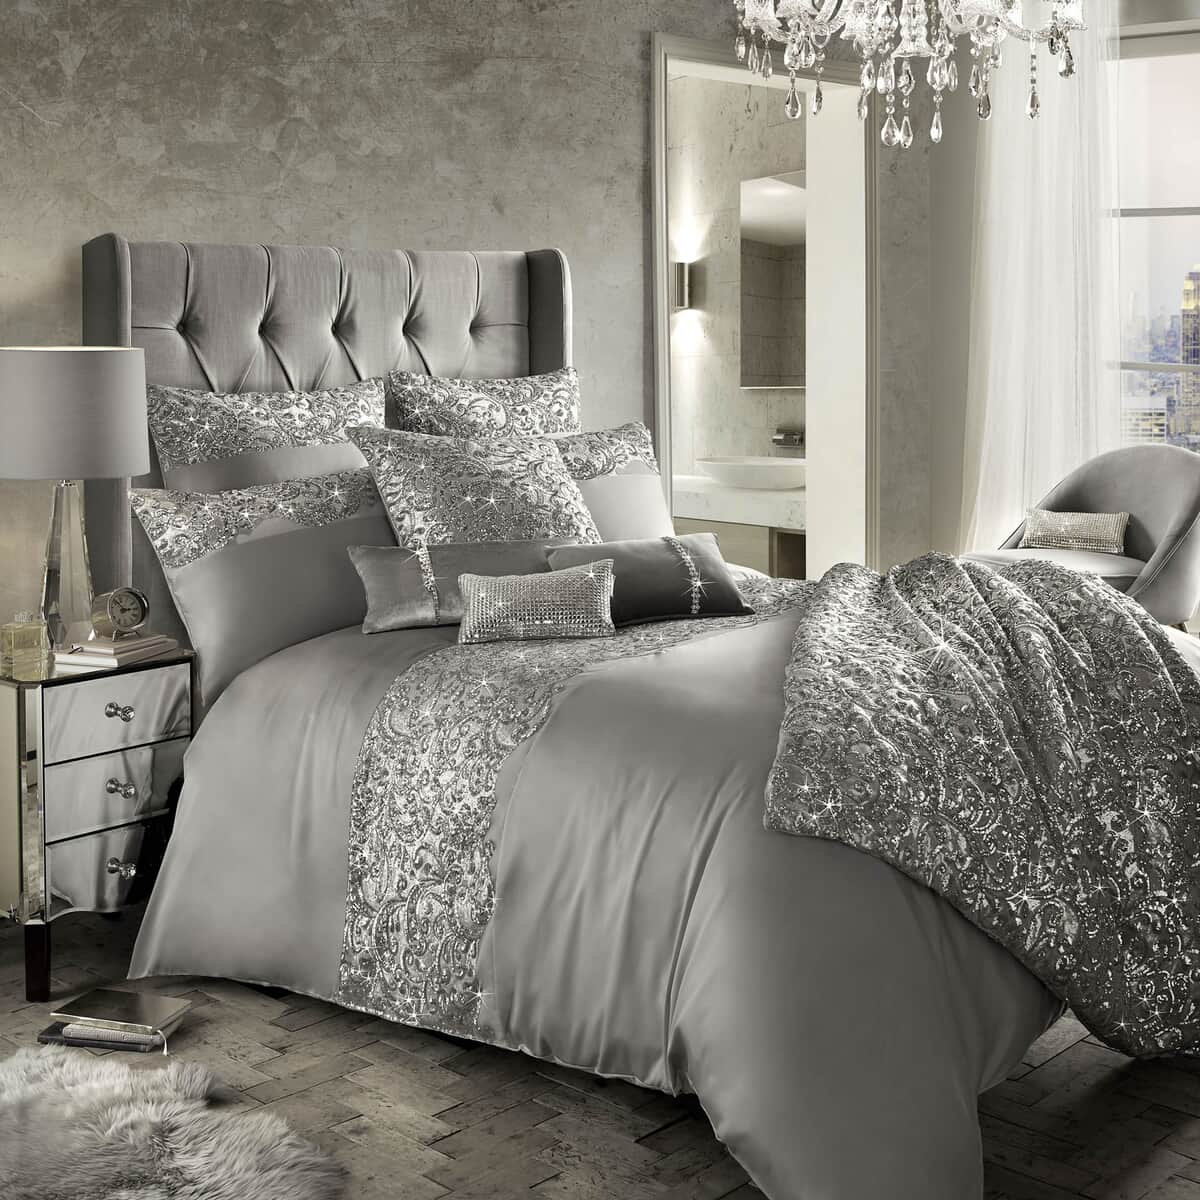 Kylie at Home Cadence Silver large